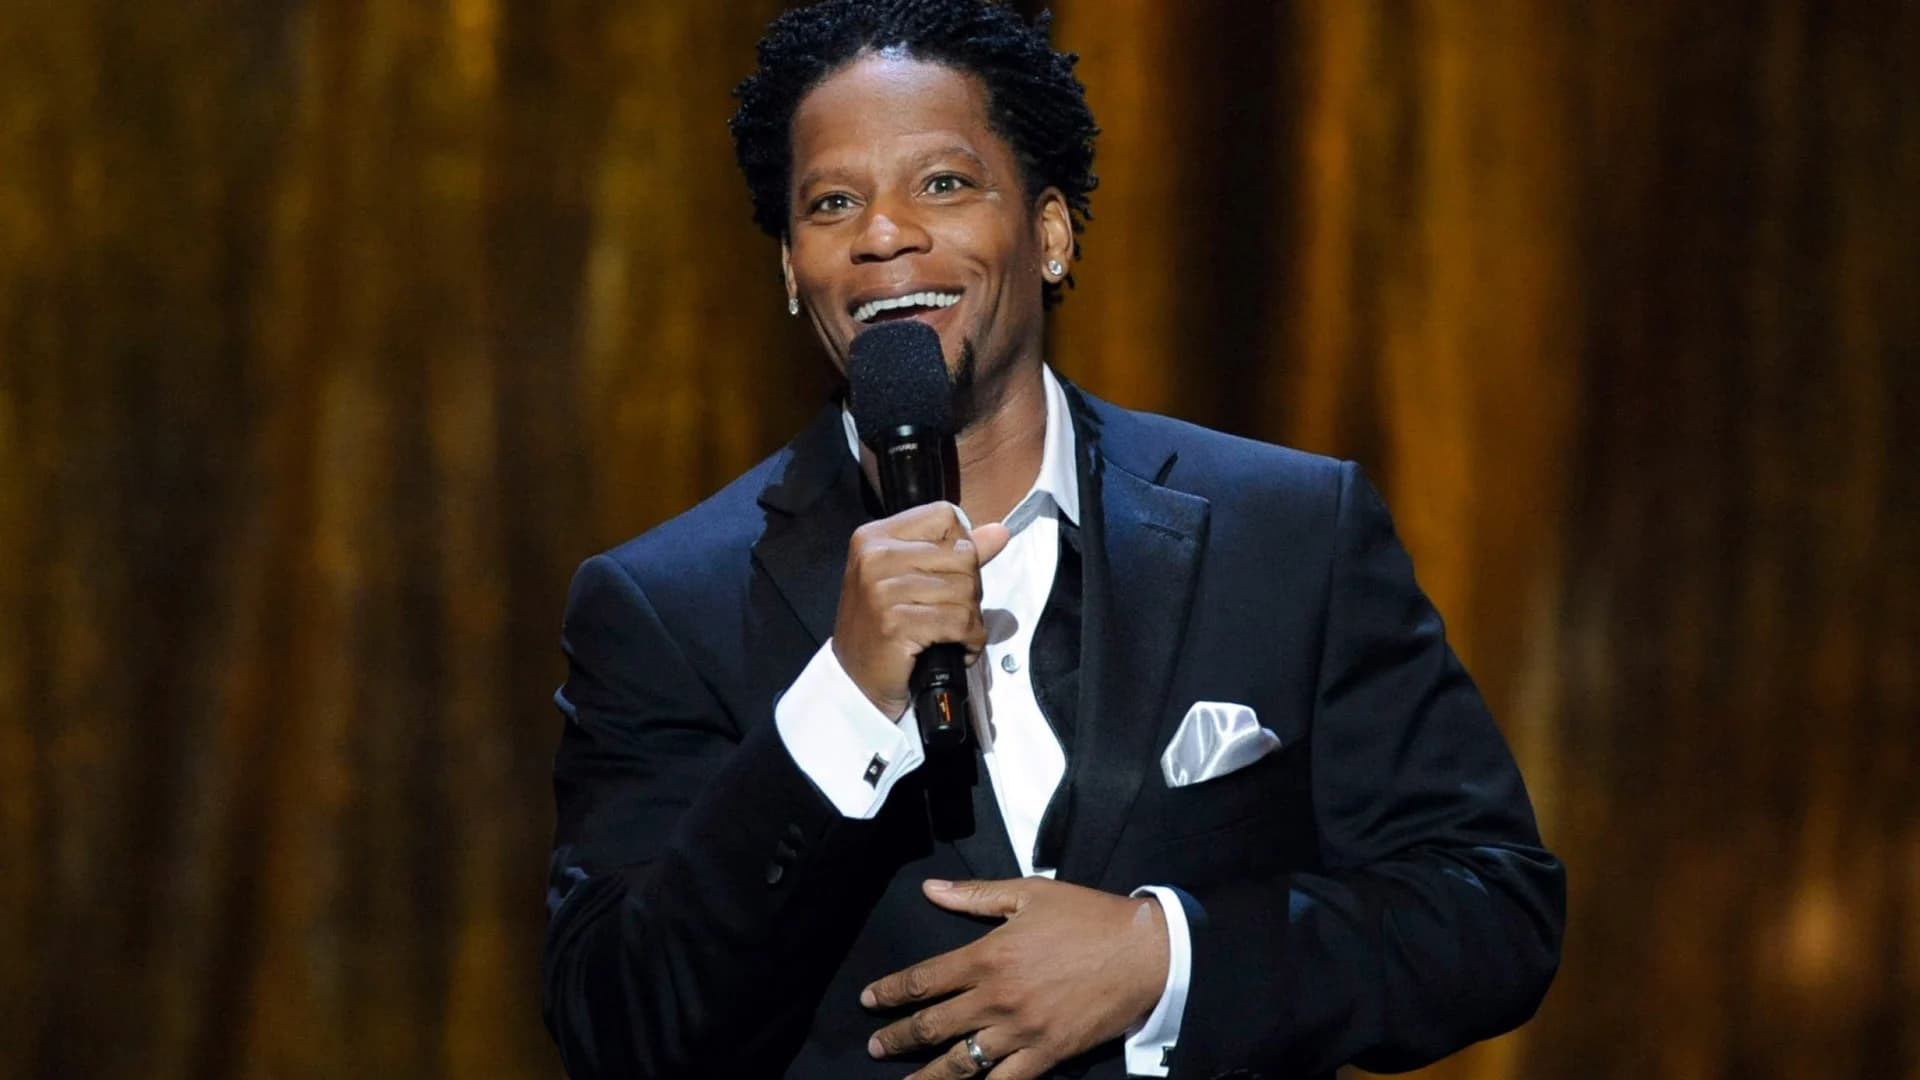 Comedian DL Hughley tests positive for COVID-19 after collapsing onstage